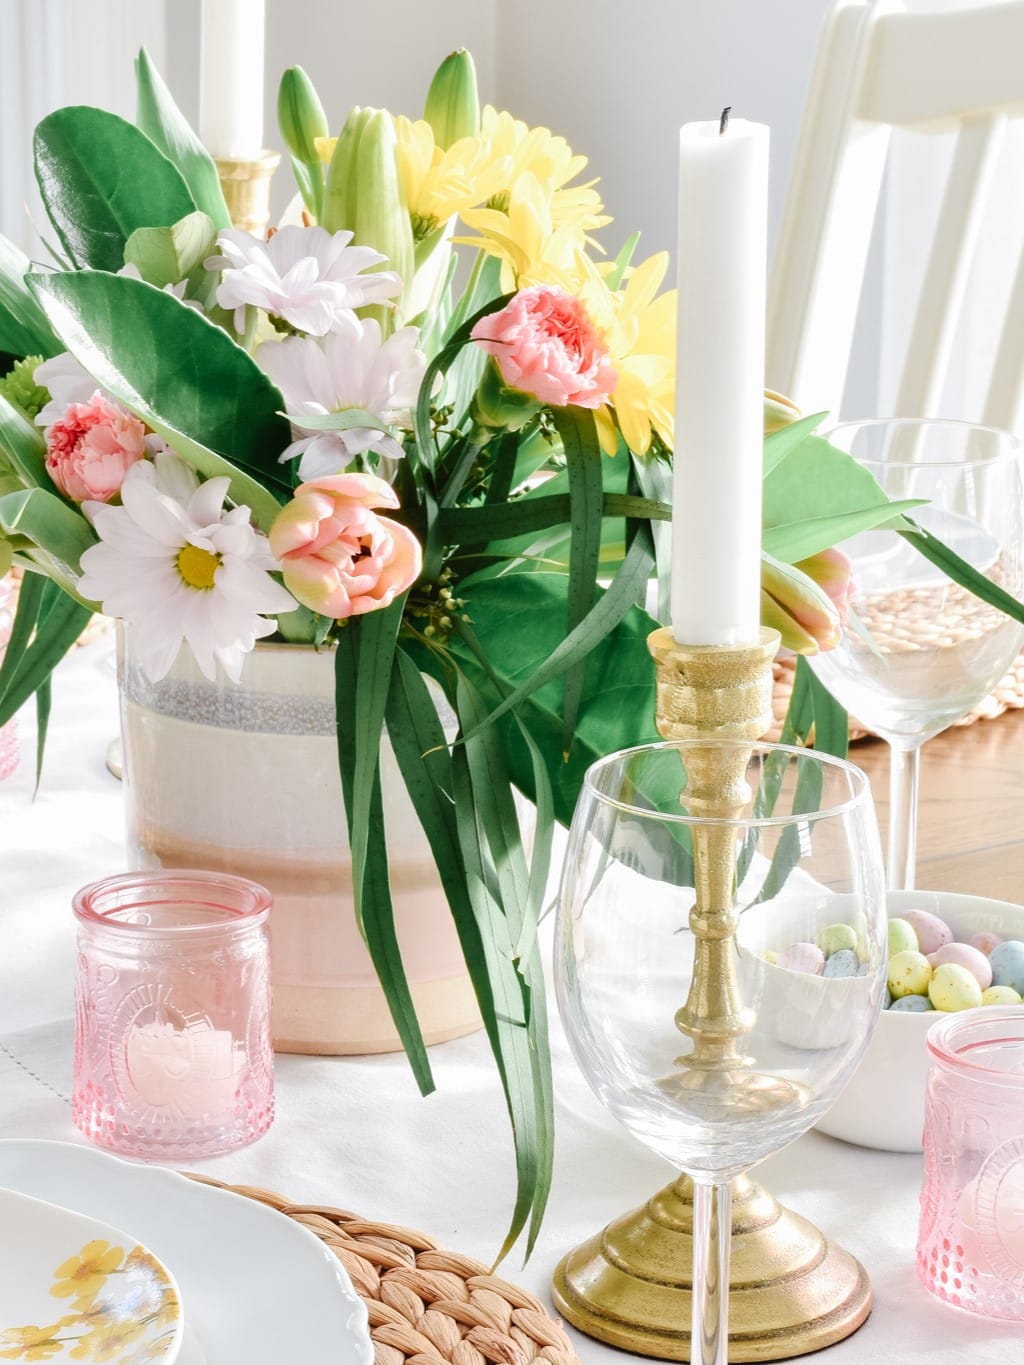 Celebrate Spring with Beautiful Table Decorations